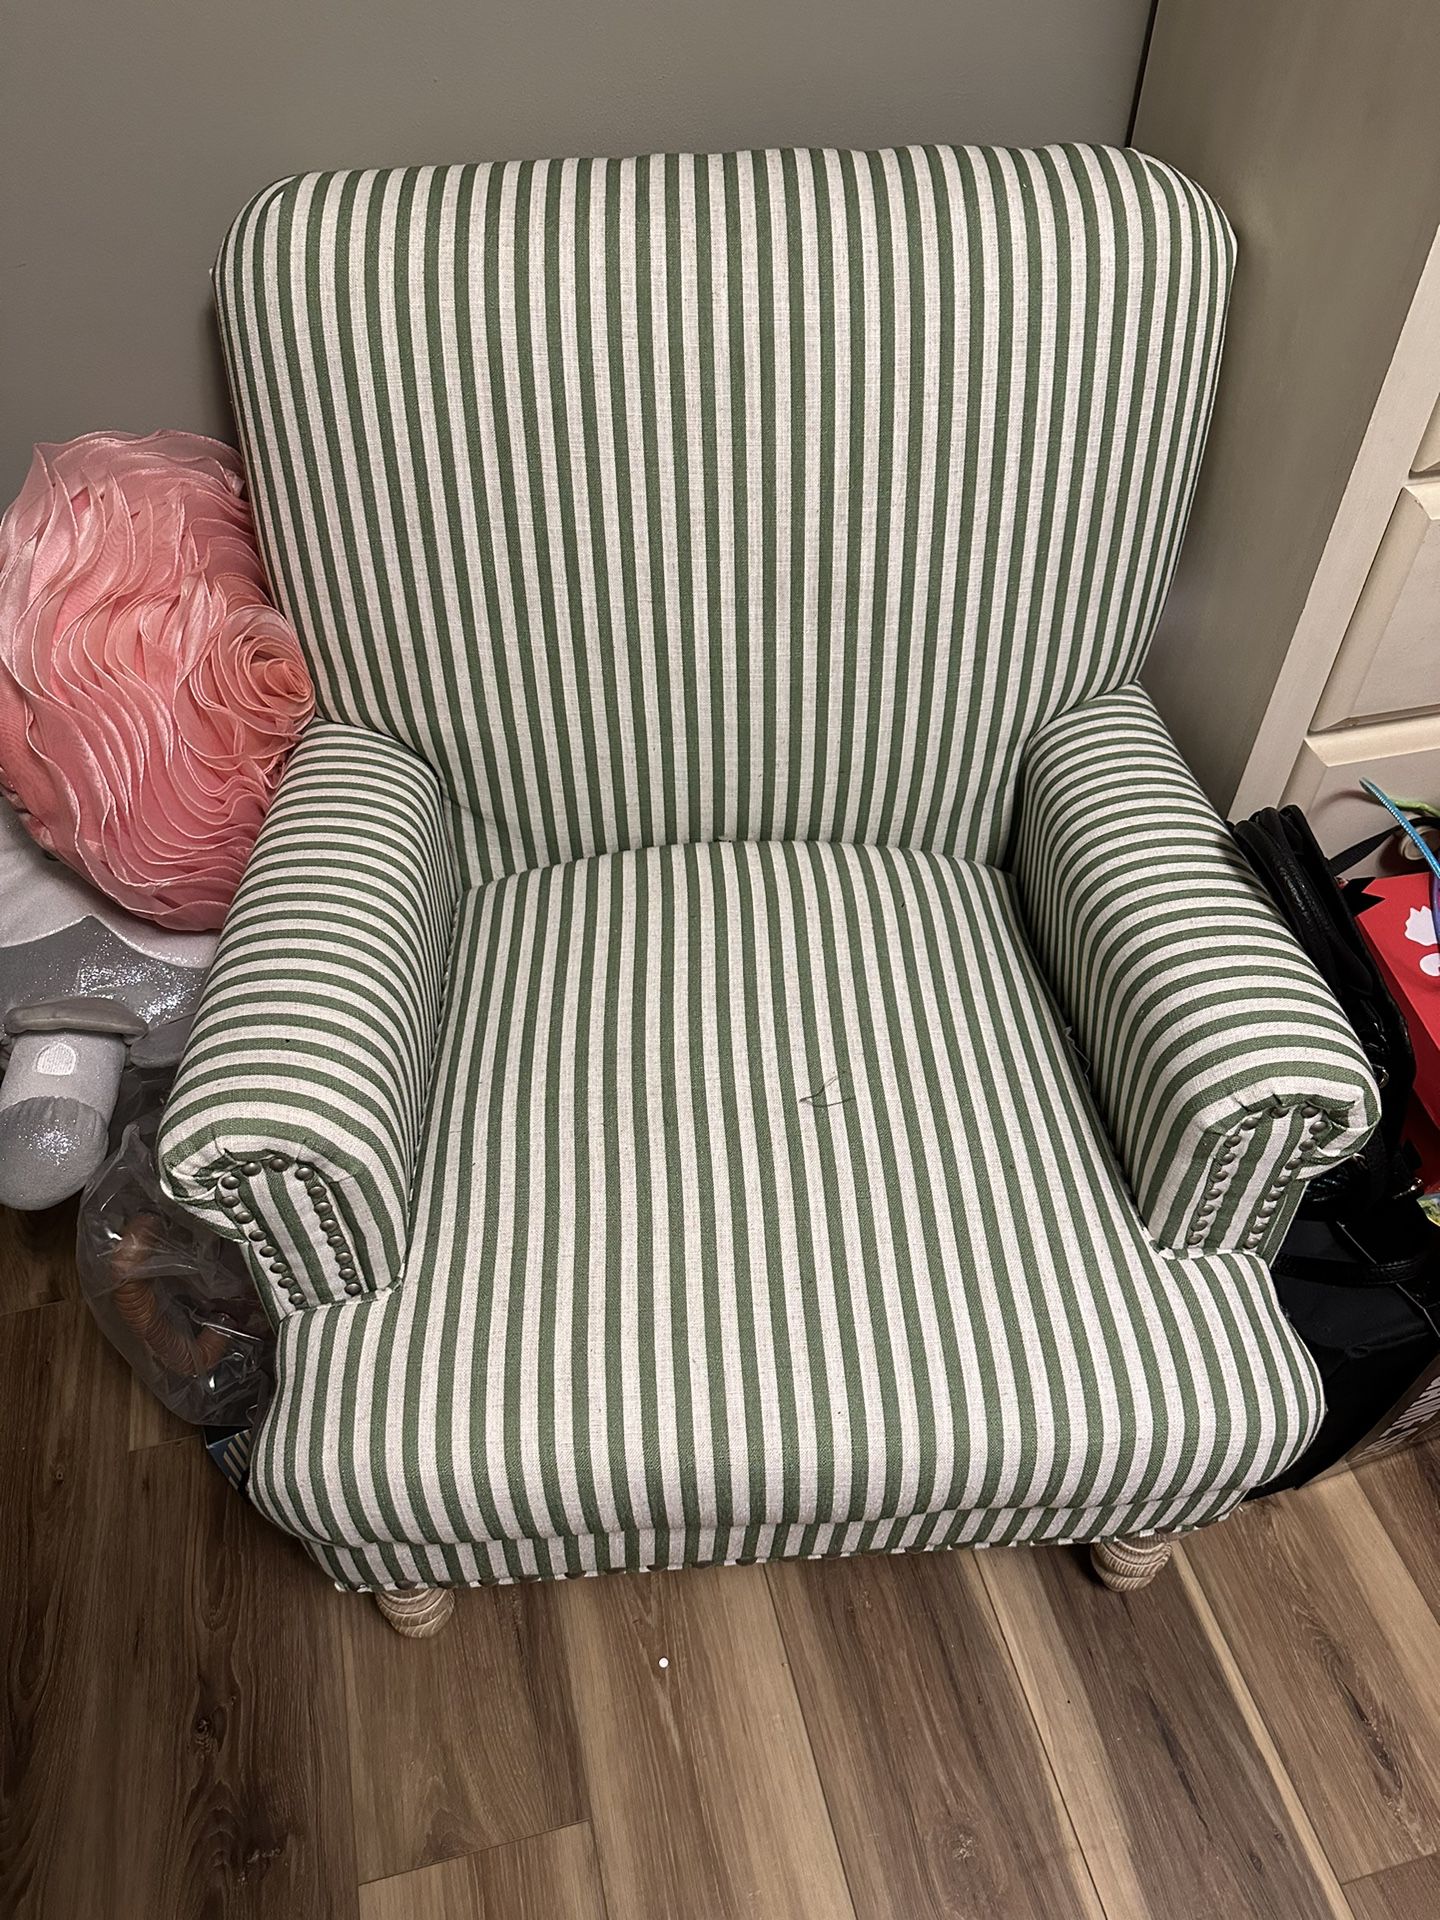 Striped Green And White Chair